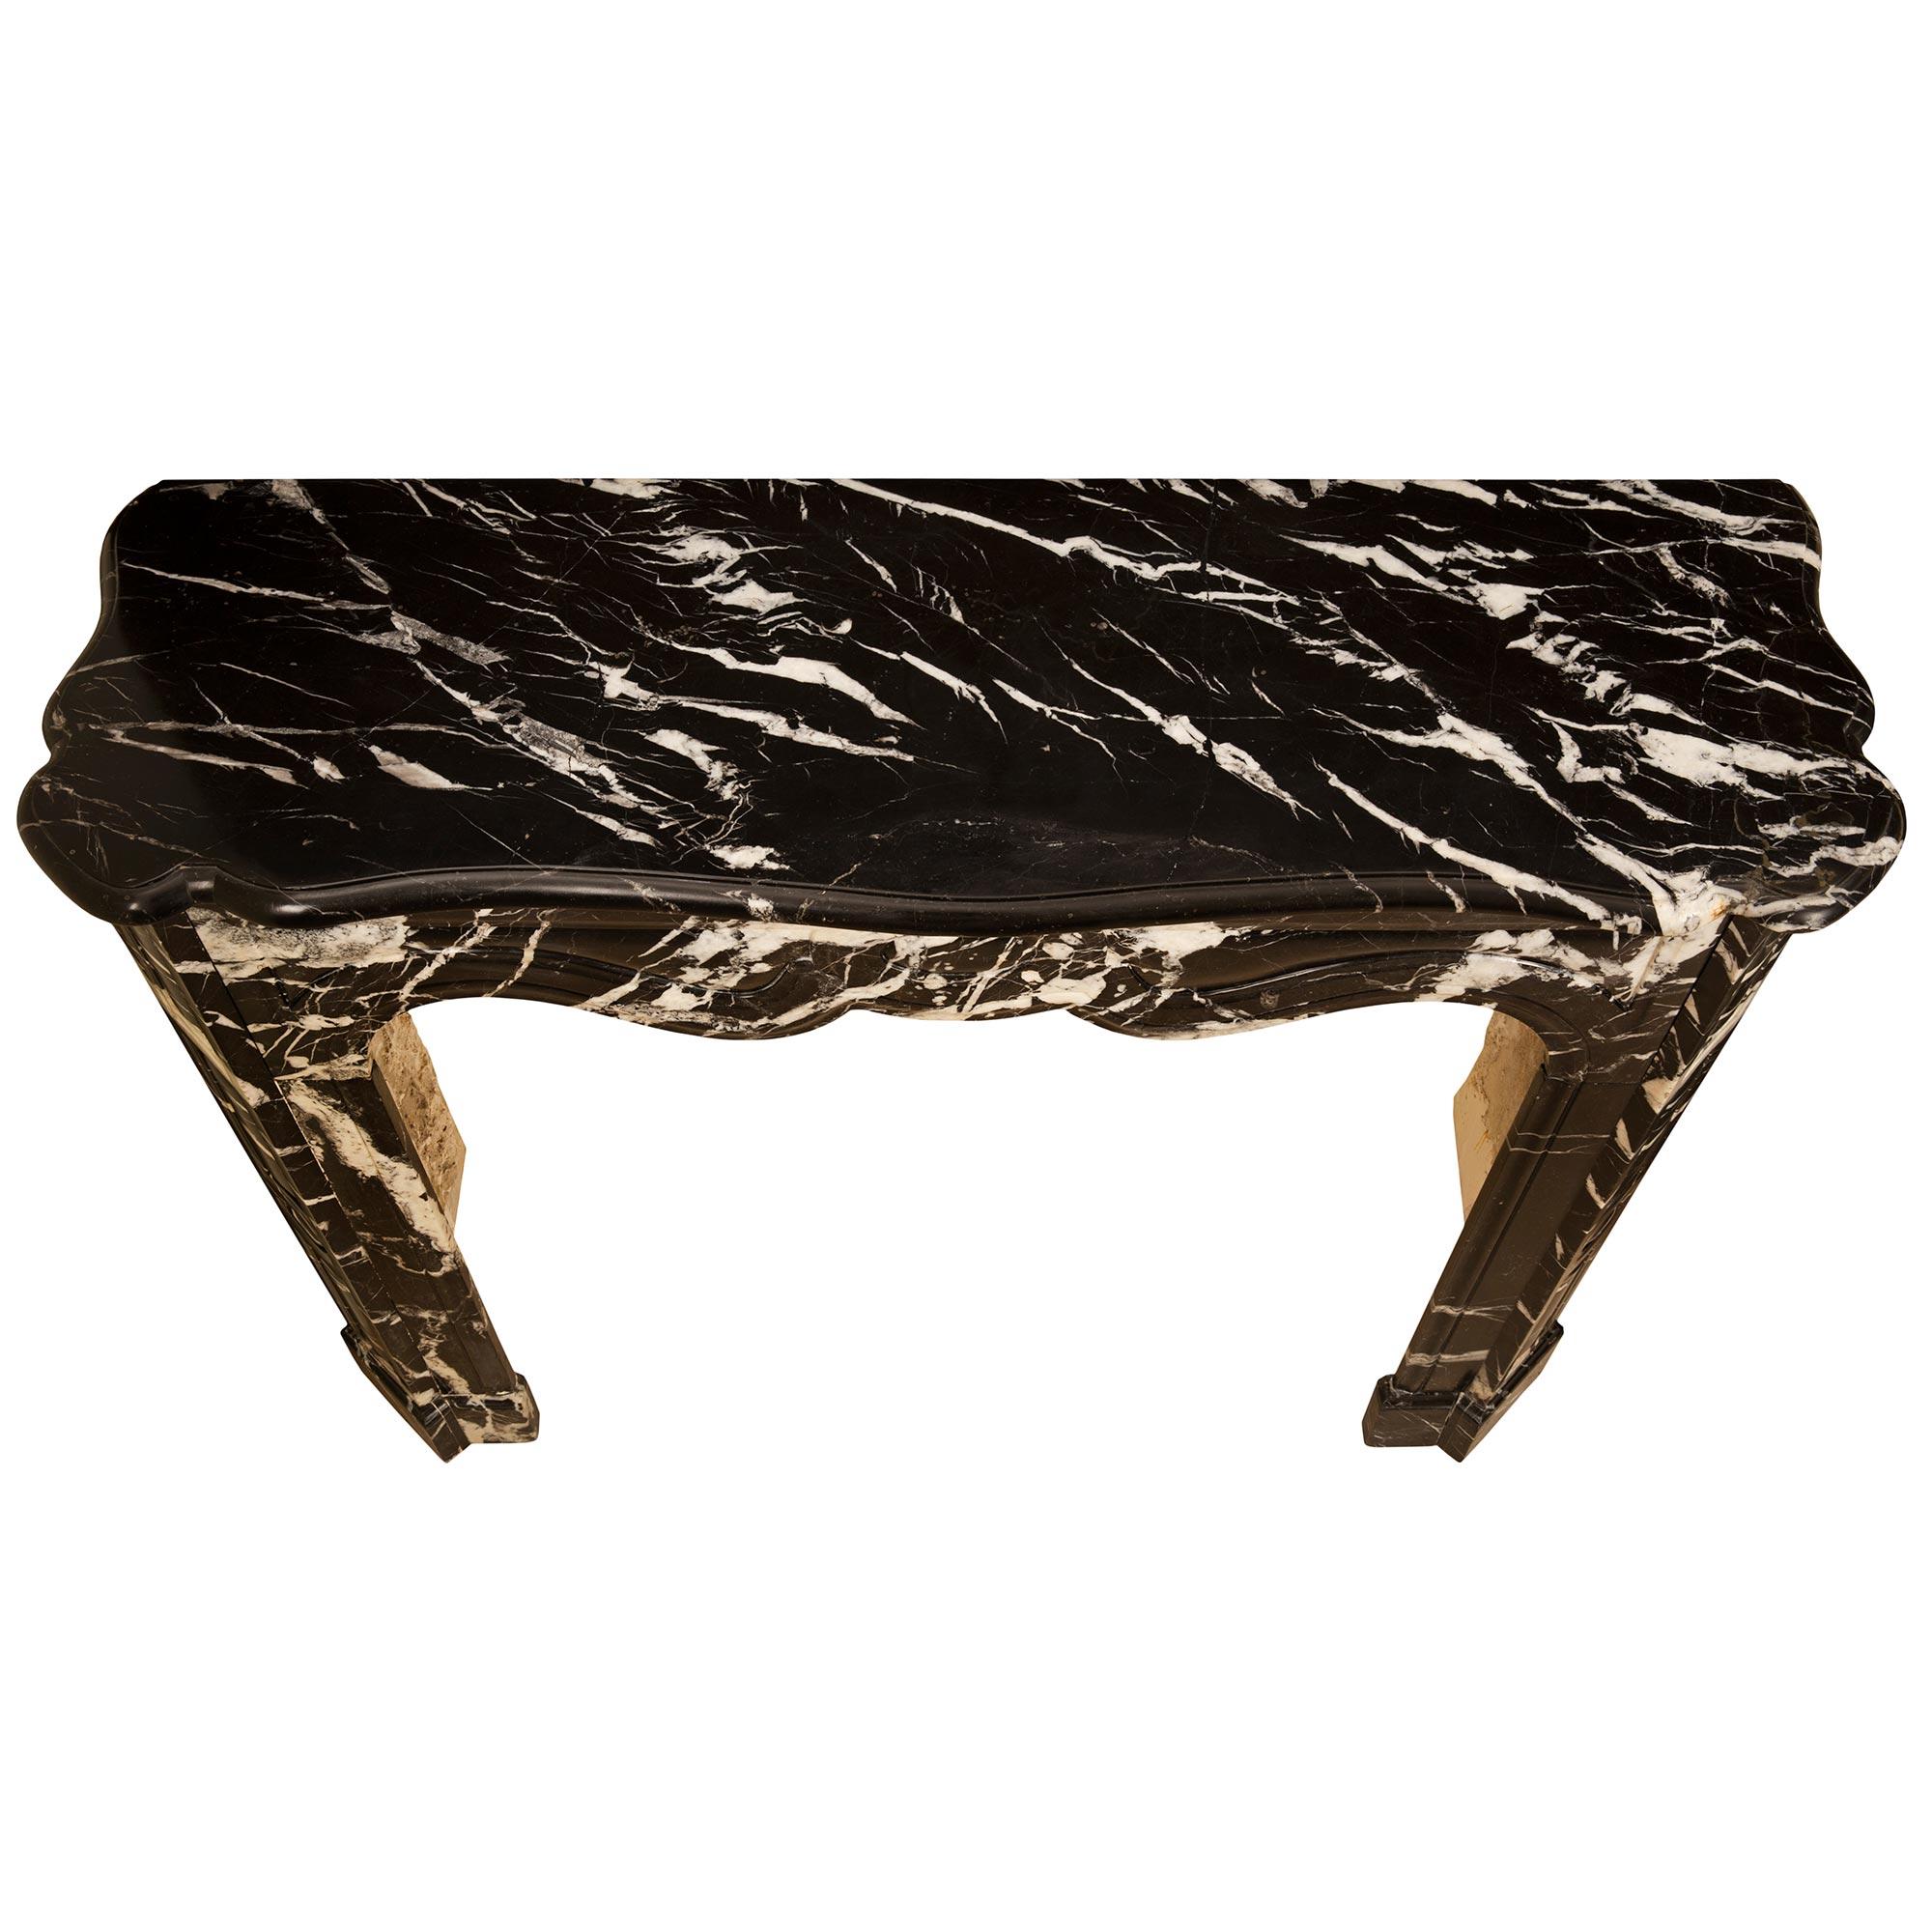 An impressive French 19th century Louis XV st. Noir Antique marble mantel. The mantle is raised by elegant jambs with finely mottled bases below elegant recessed designs, cabochons, and circular mottled ormolu air vents with fine foliate designs.